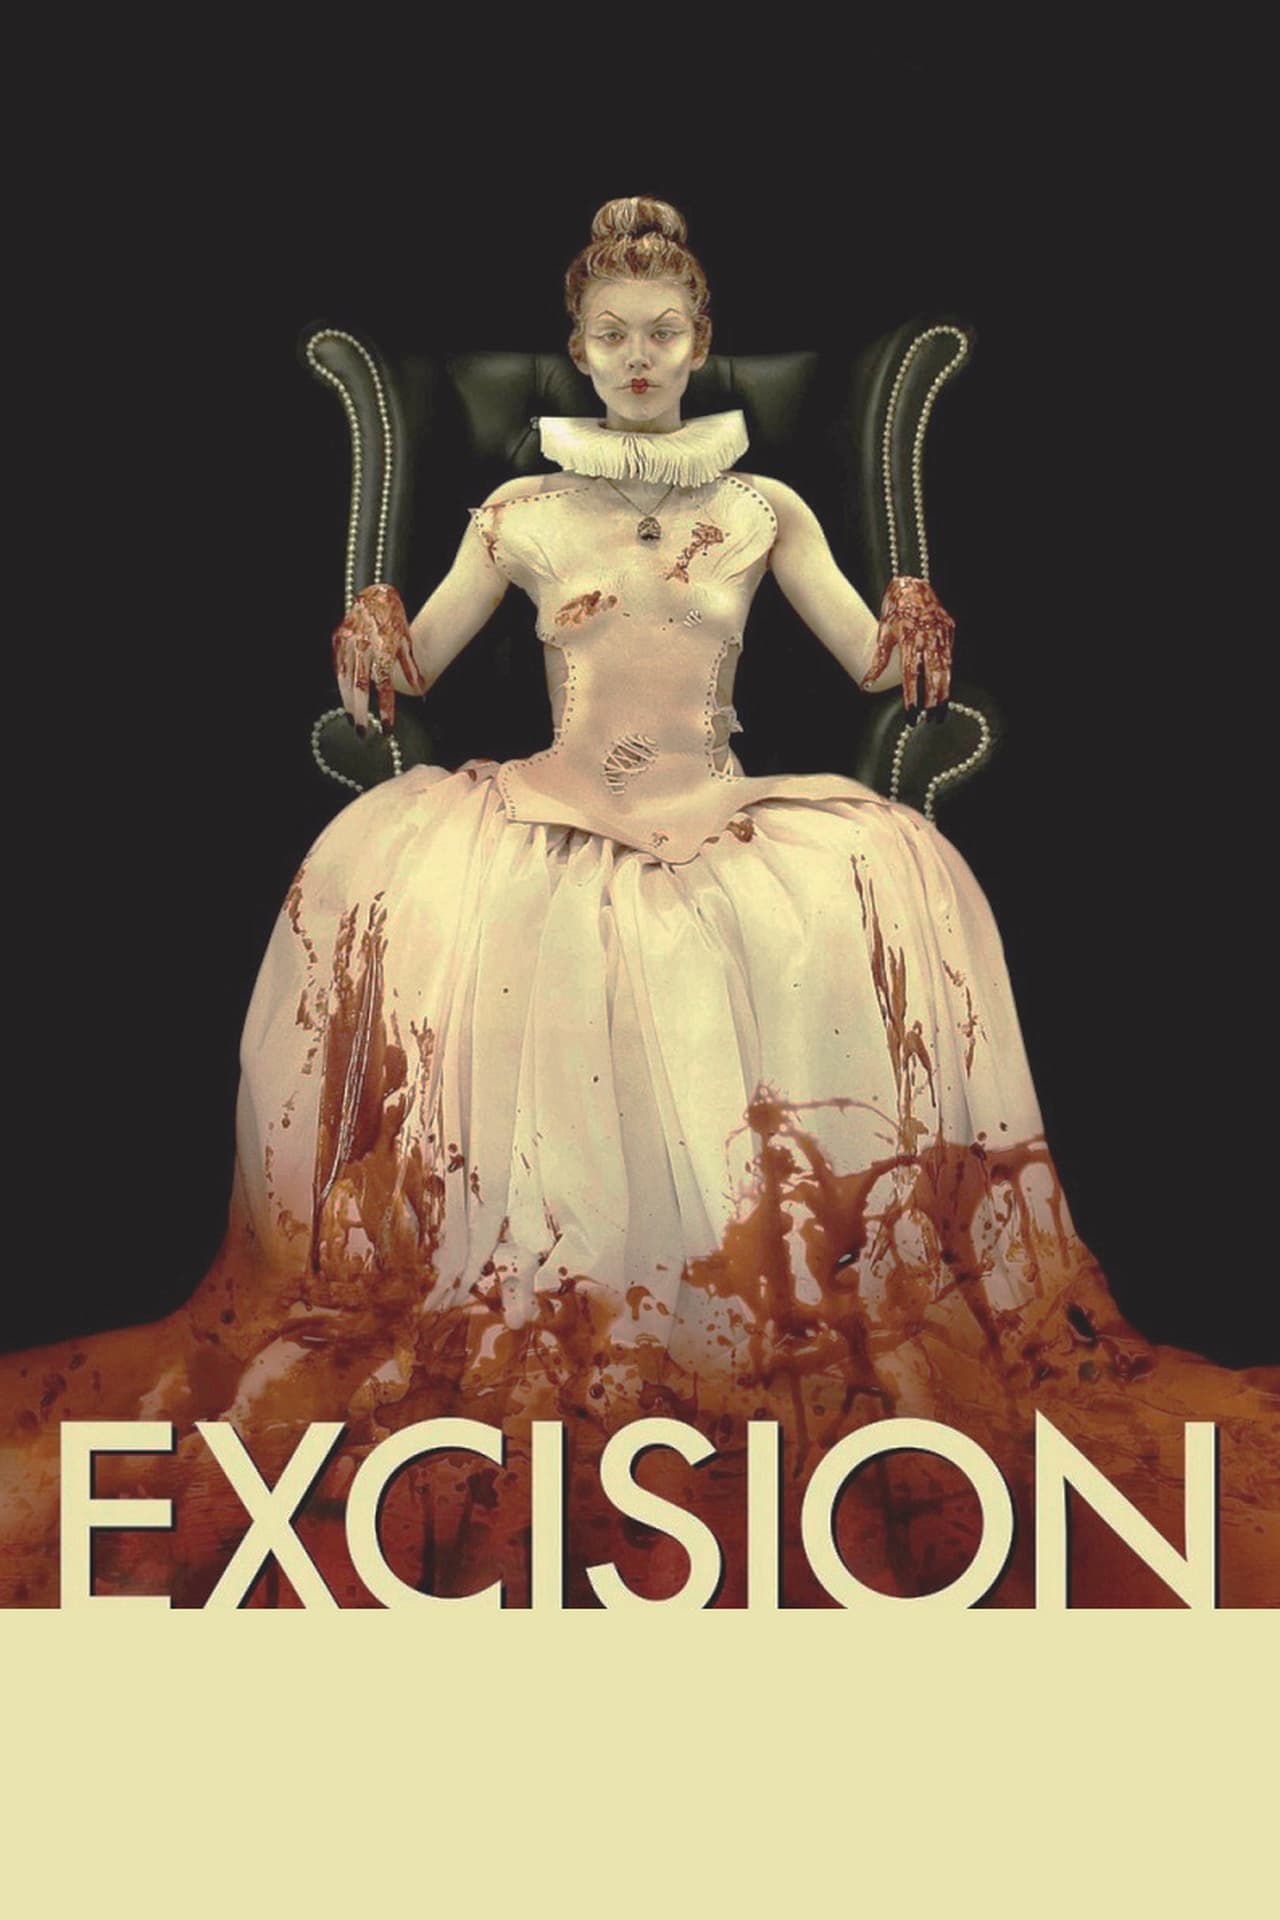 Excision poster